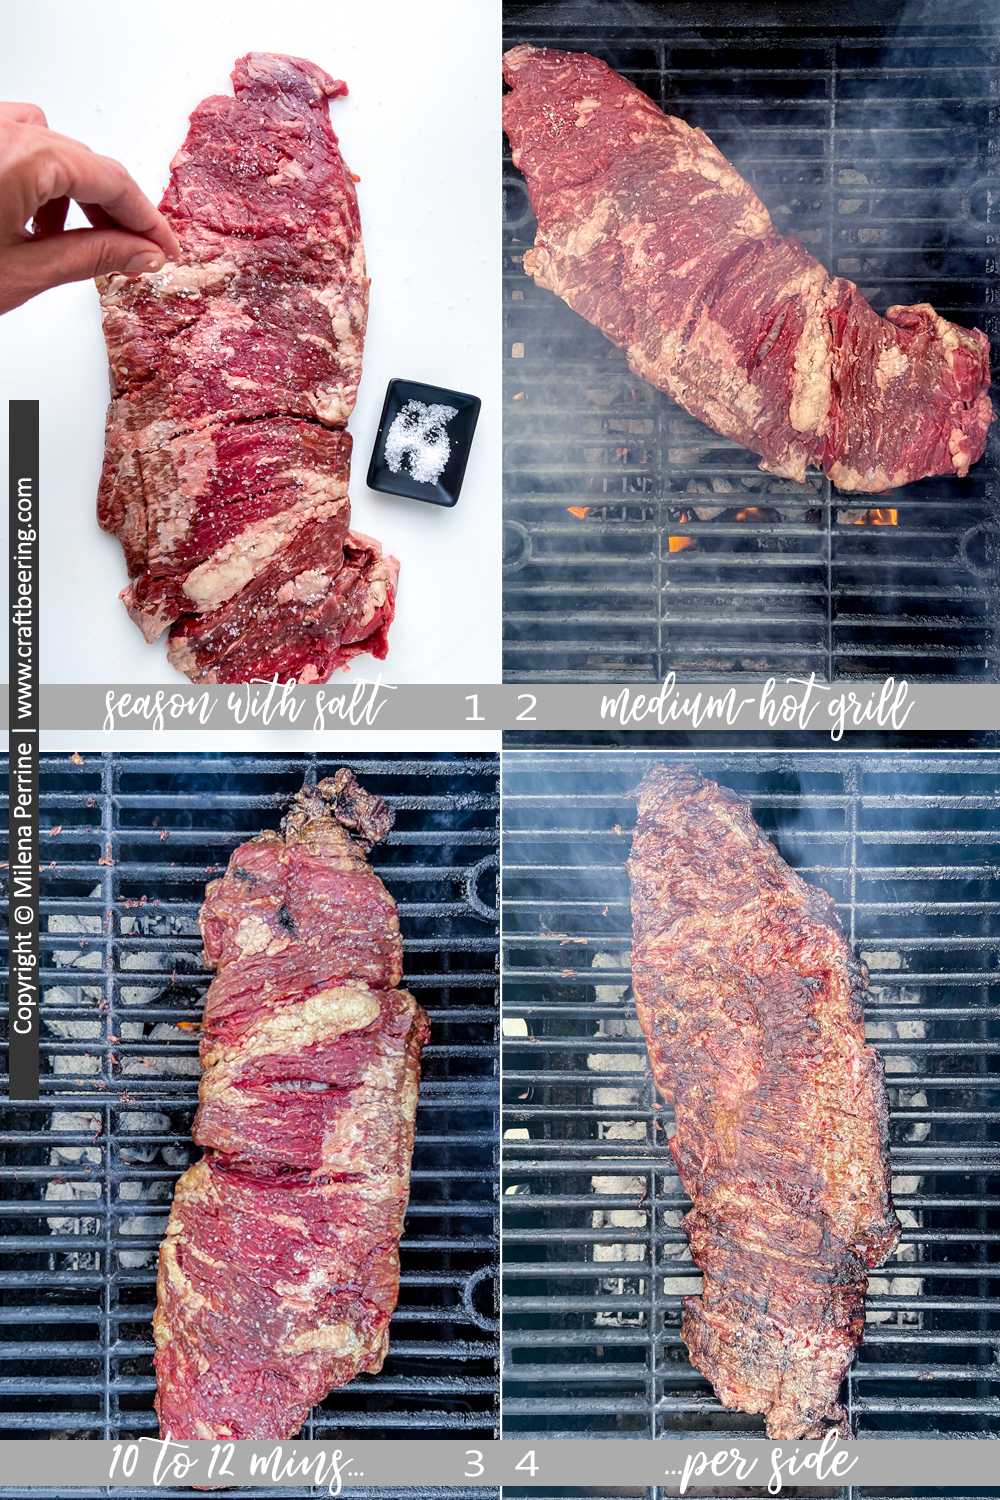 How to cook a bavette on the grill, part 1